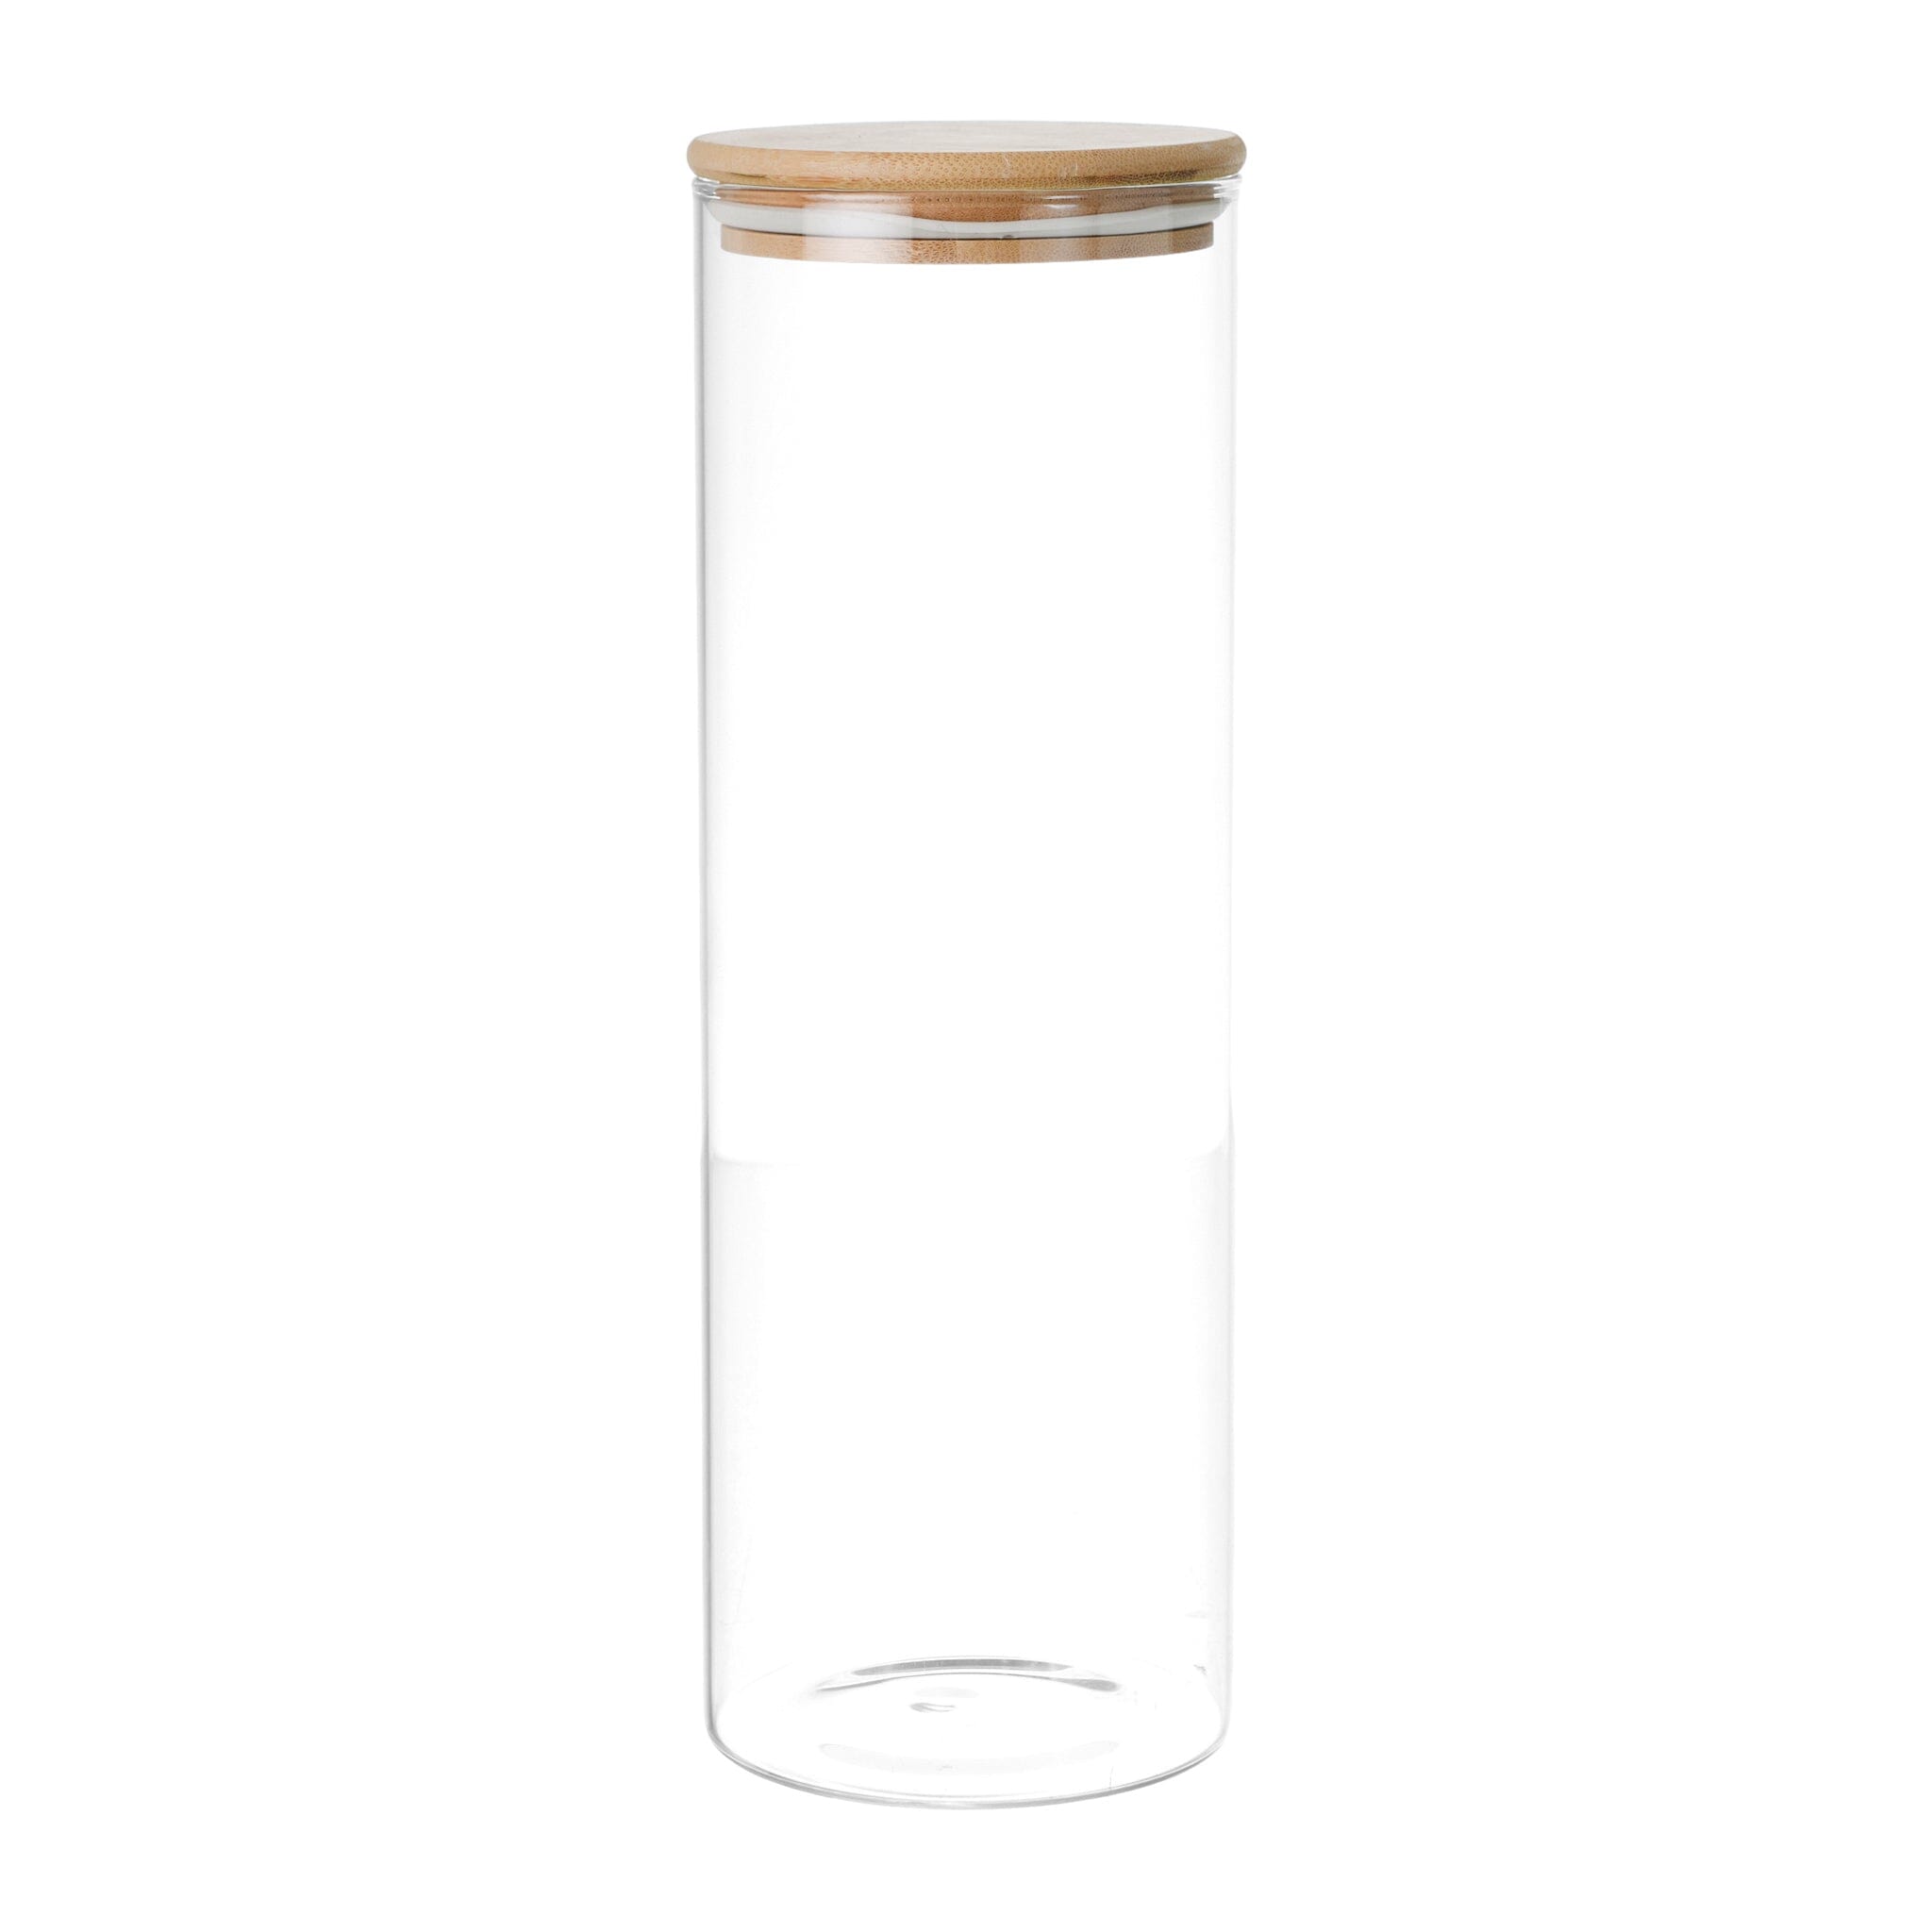 O'lala - Glass Jar with Wooden Cover - White - 10x29cm - 520008049